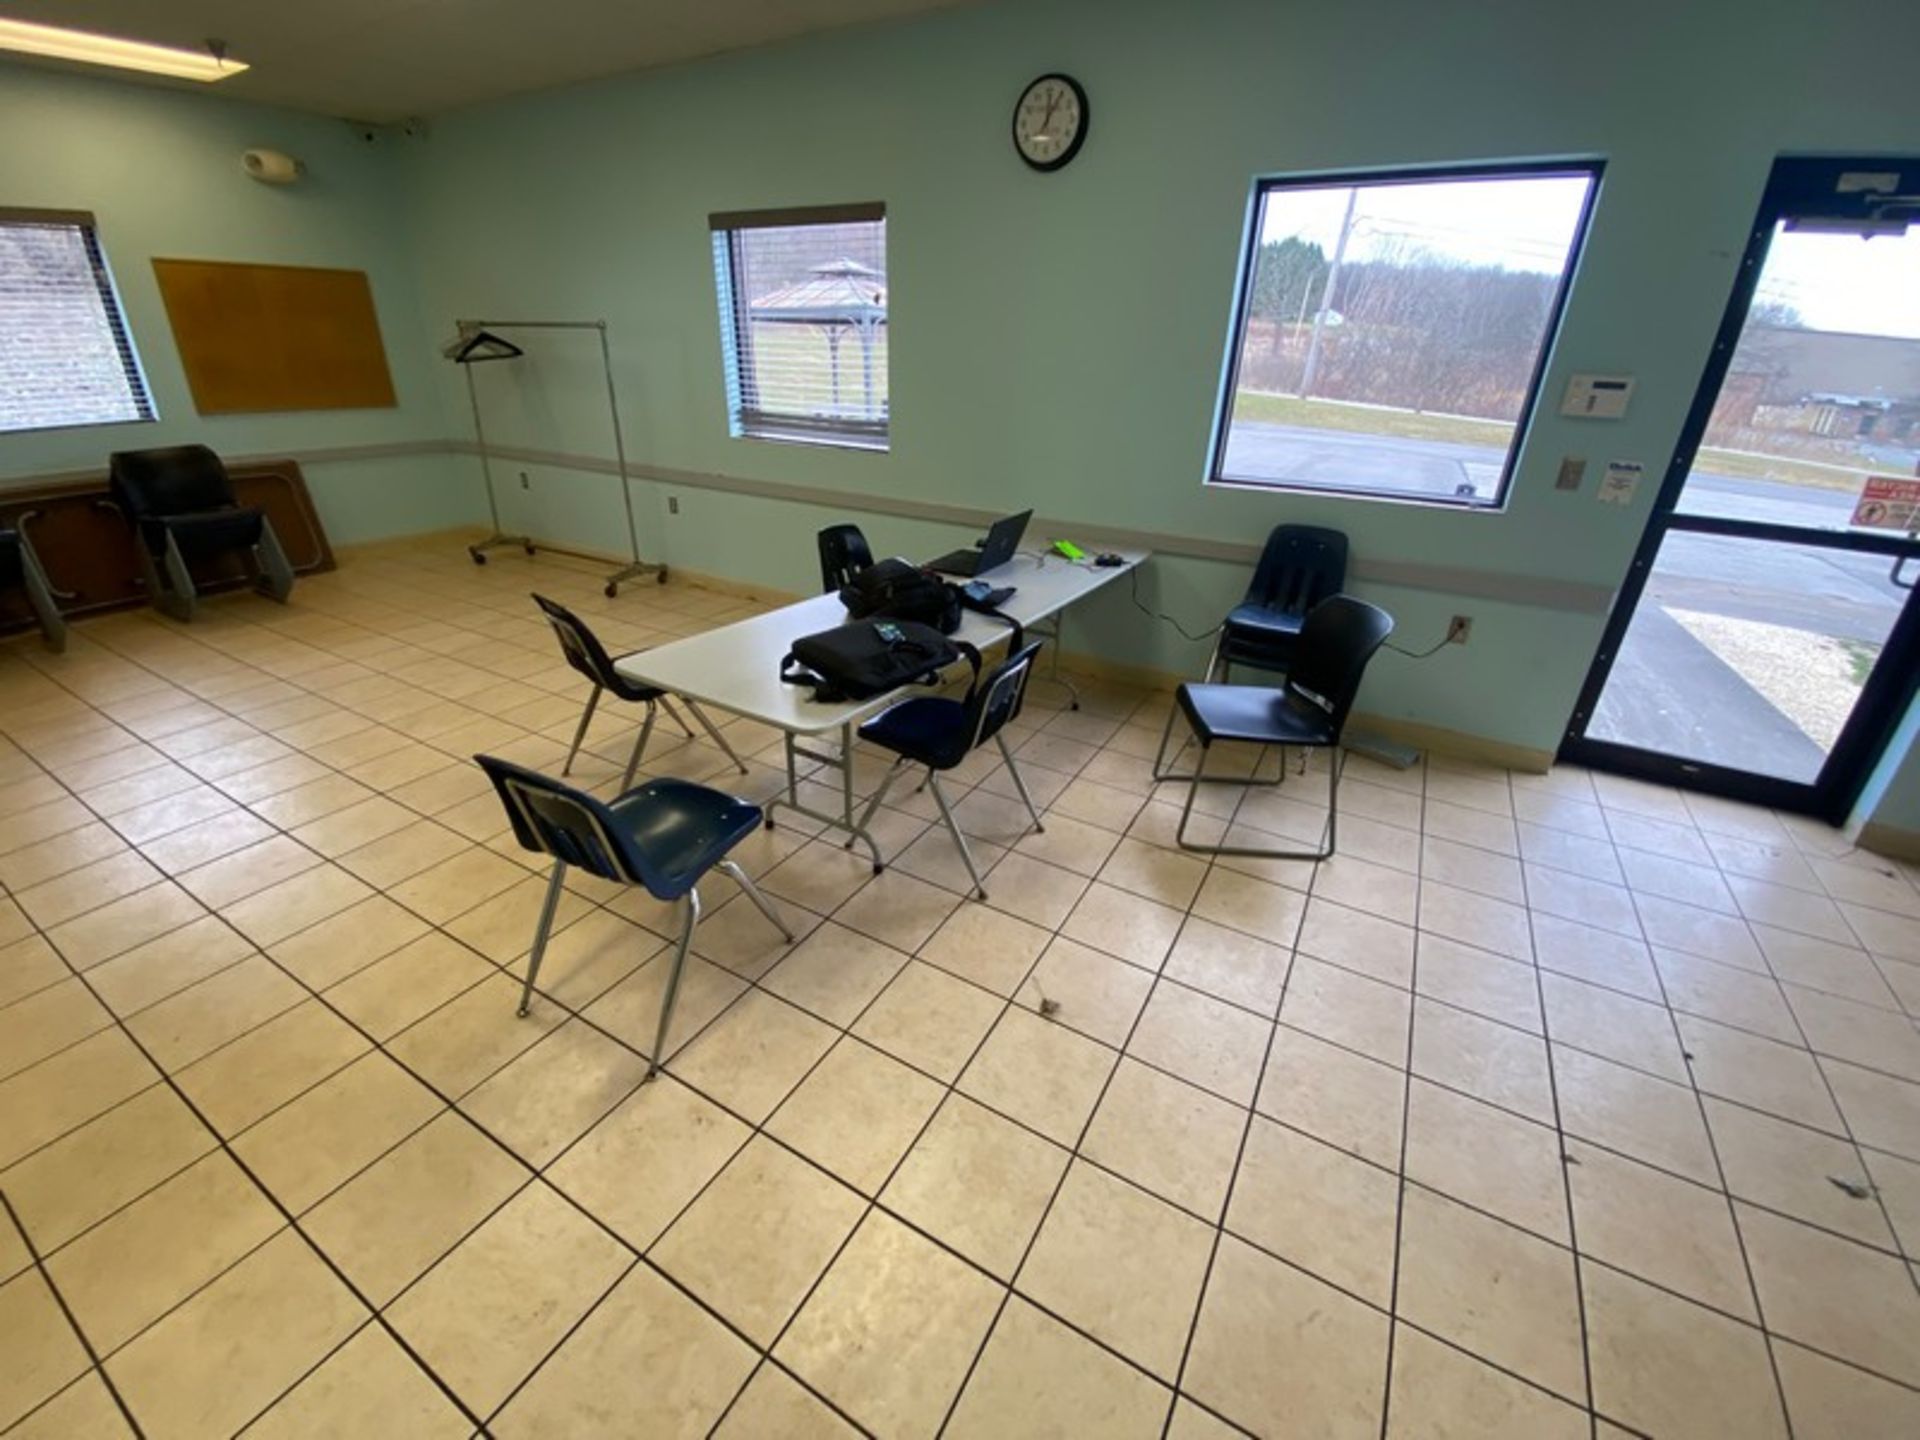 CONTENTS OF CAFETERIA, INCLUDES CHAIRS, TABLES, CORK BOARDS, & CLOTHES RACKS (LOCATED IN HERMITAGE,